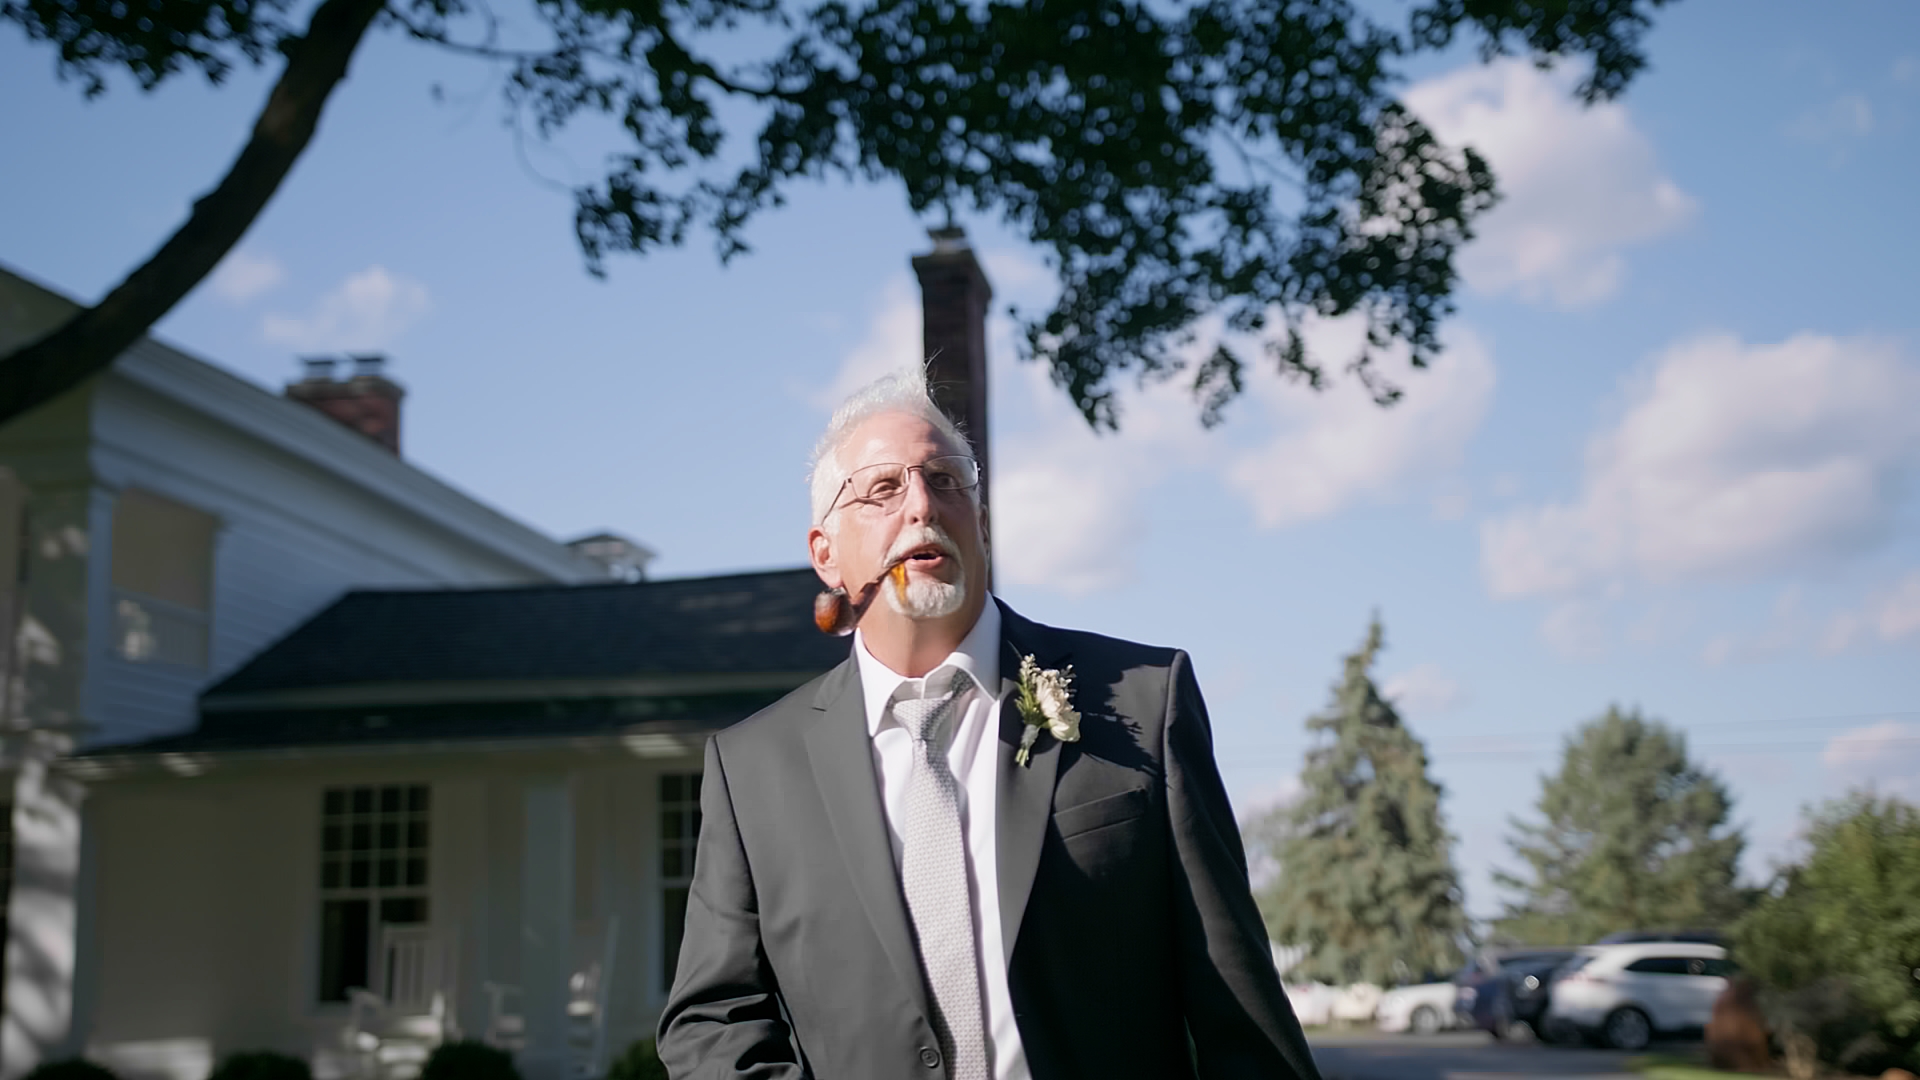 Father of the Groom at a Cornman Farms Wedding